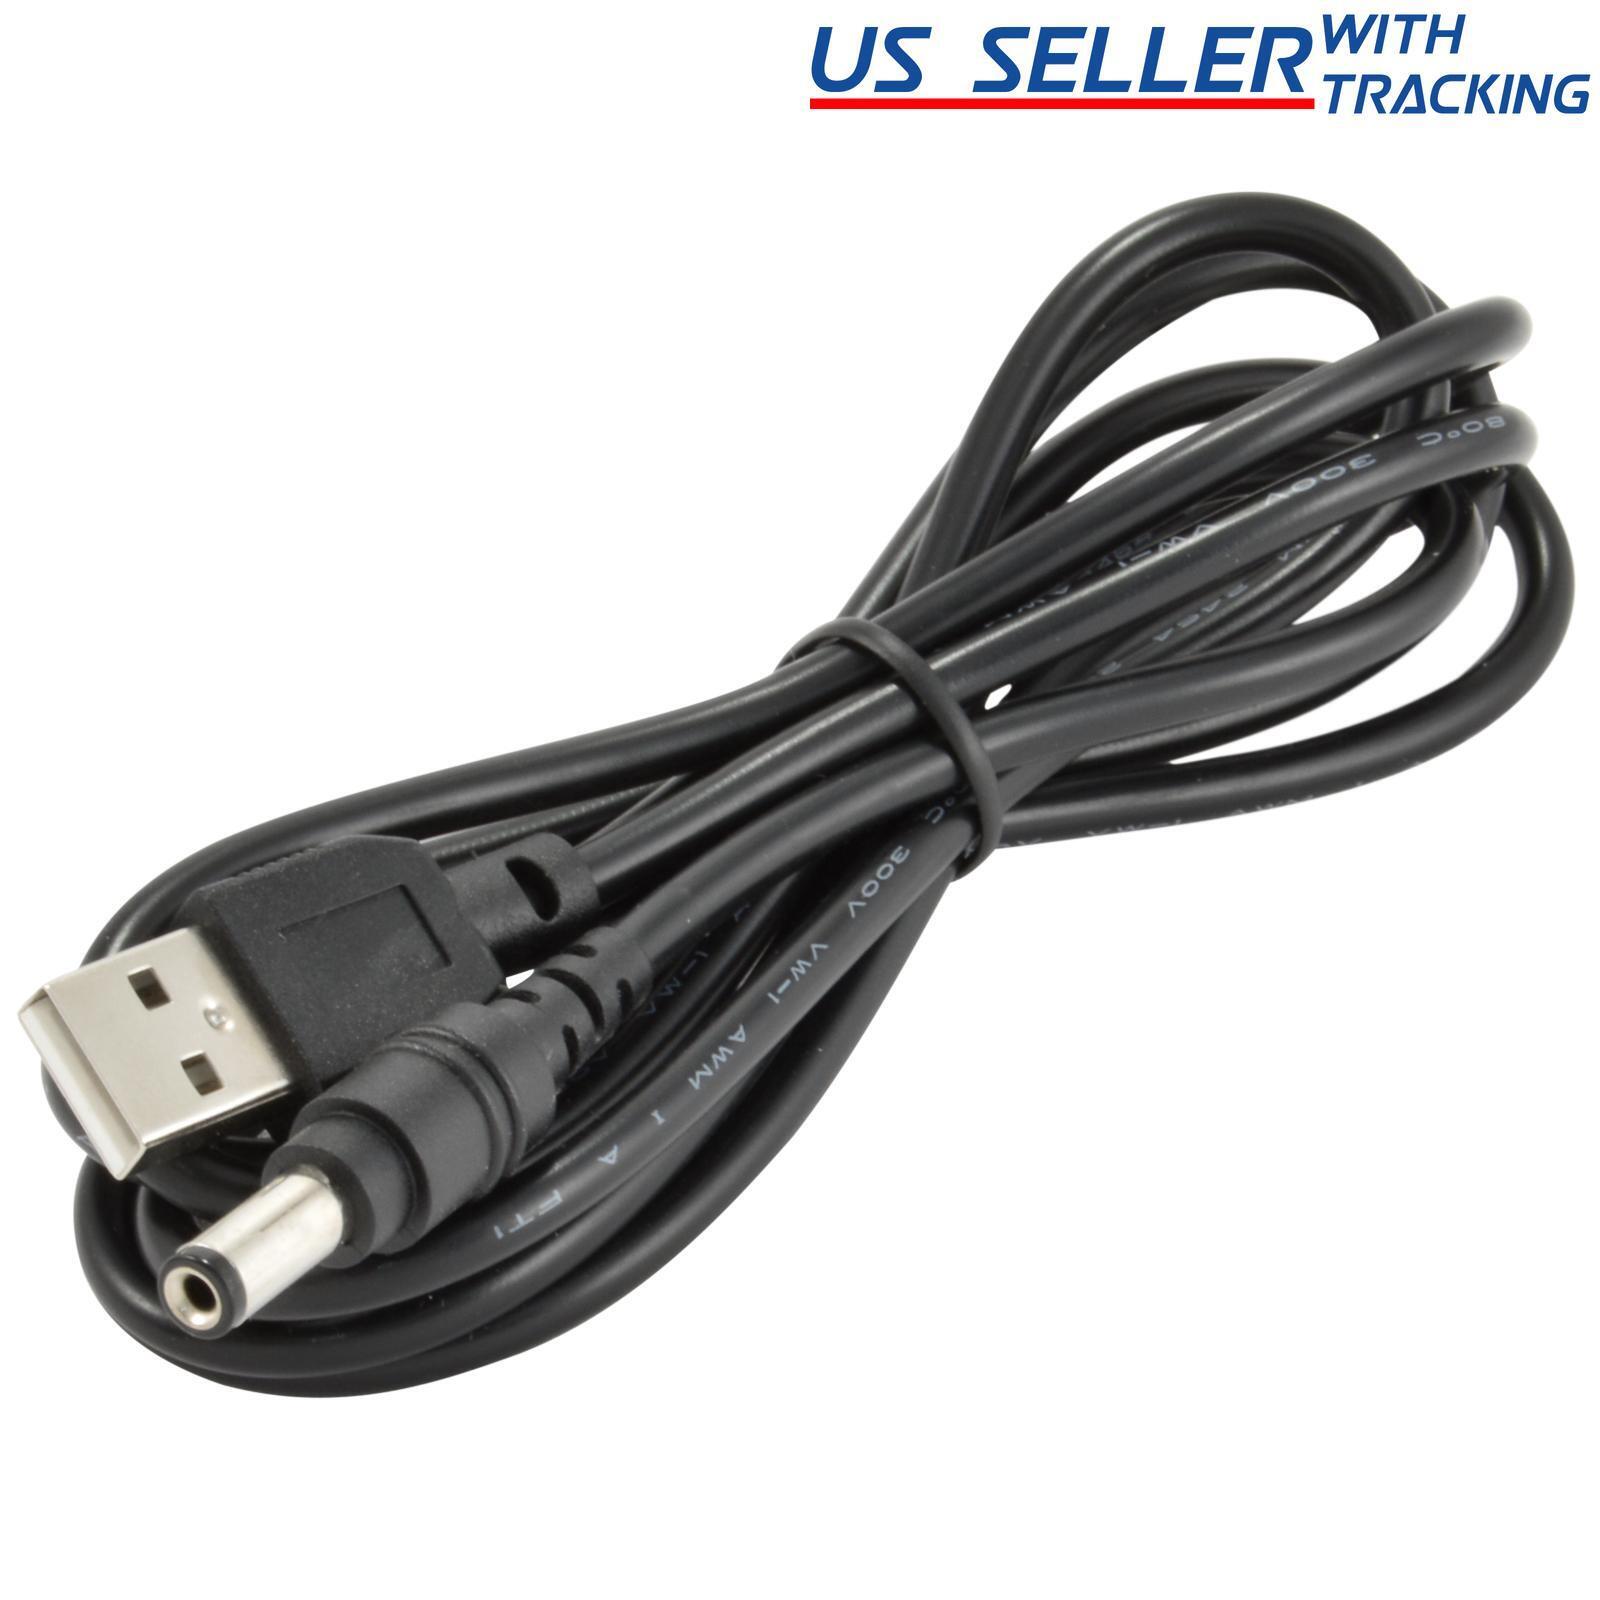 USB Male to 5.5mm x 2.1mm Barrel 5V DC Power Cable, 20 AWG Copper, 150cm / 5ft